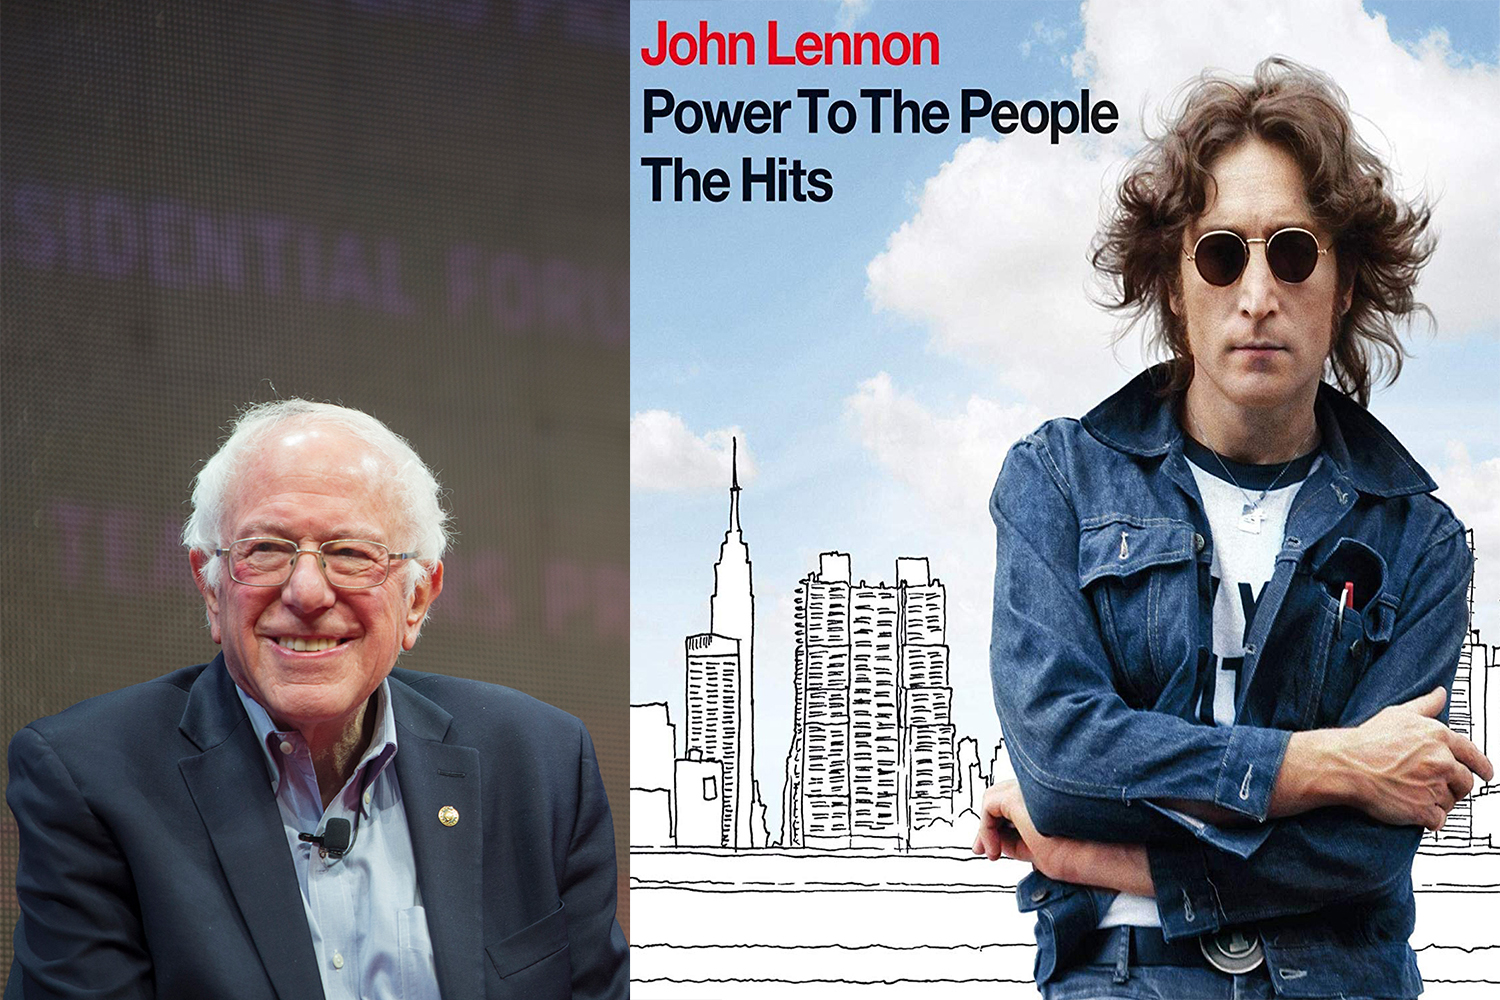 Bernie Sanders, Independent Senator from Vermont: “Power to the People” by John Lennon